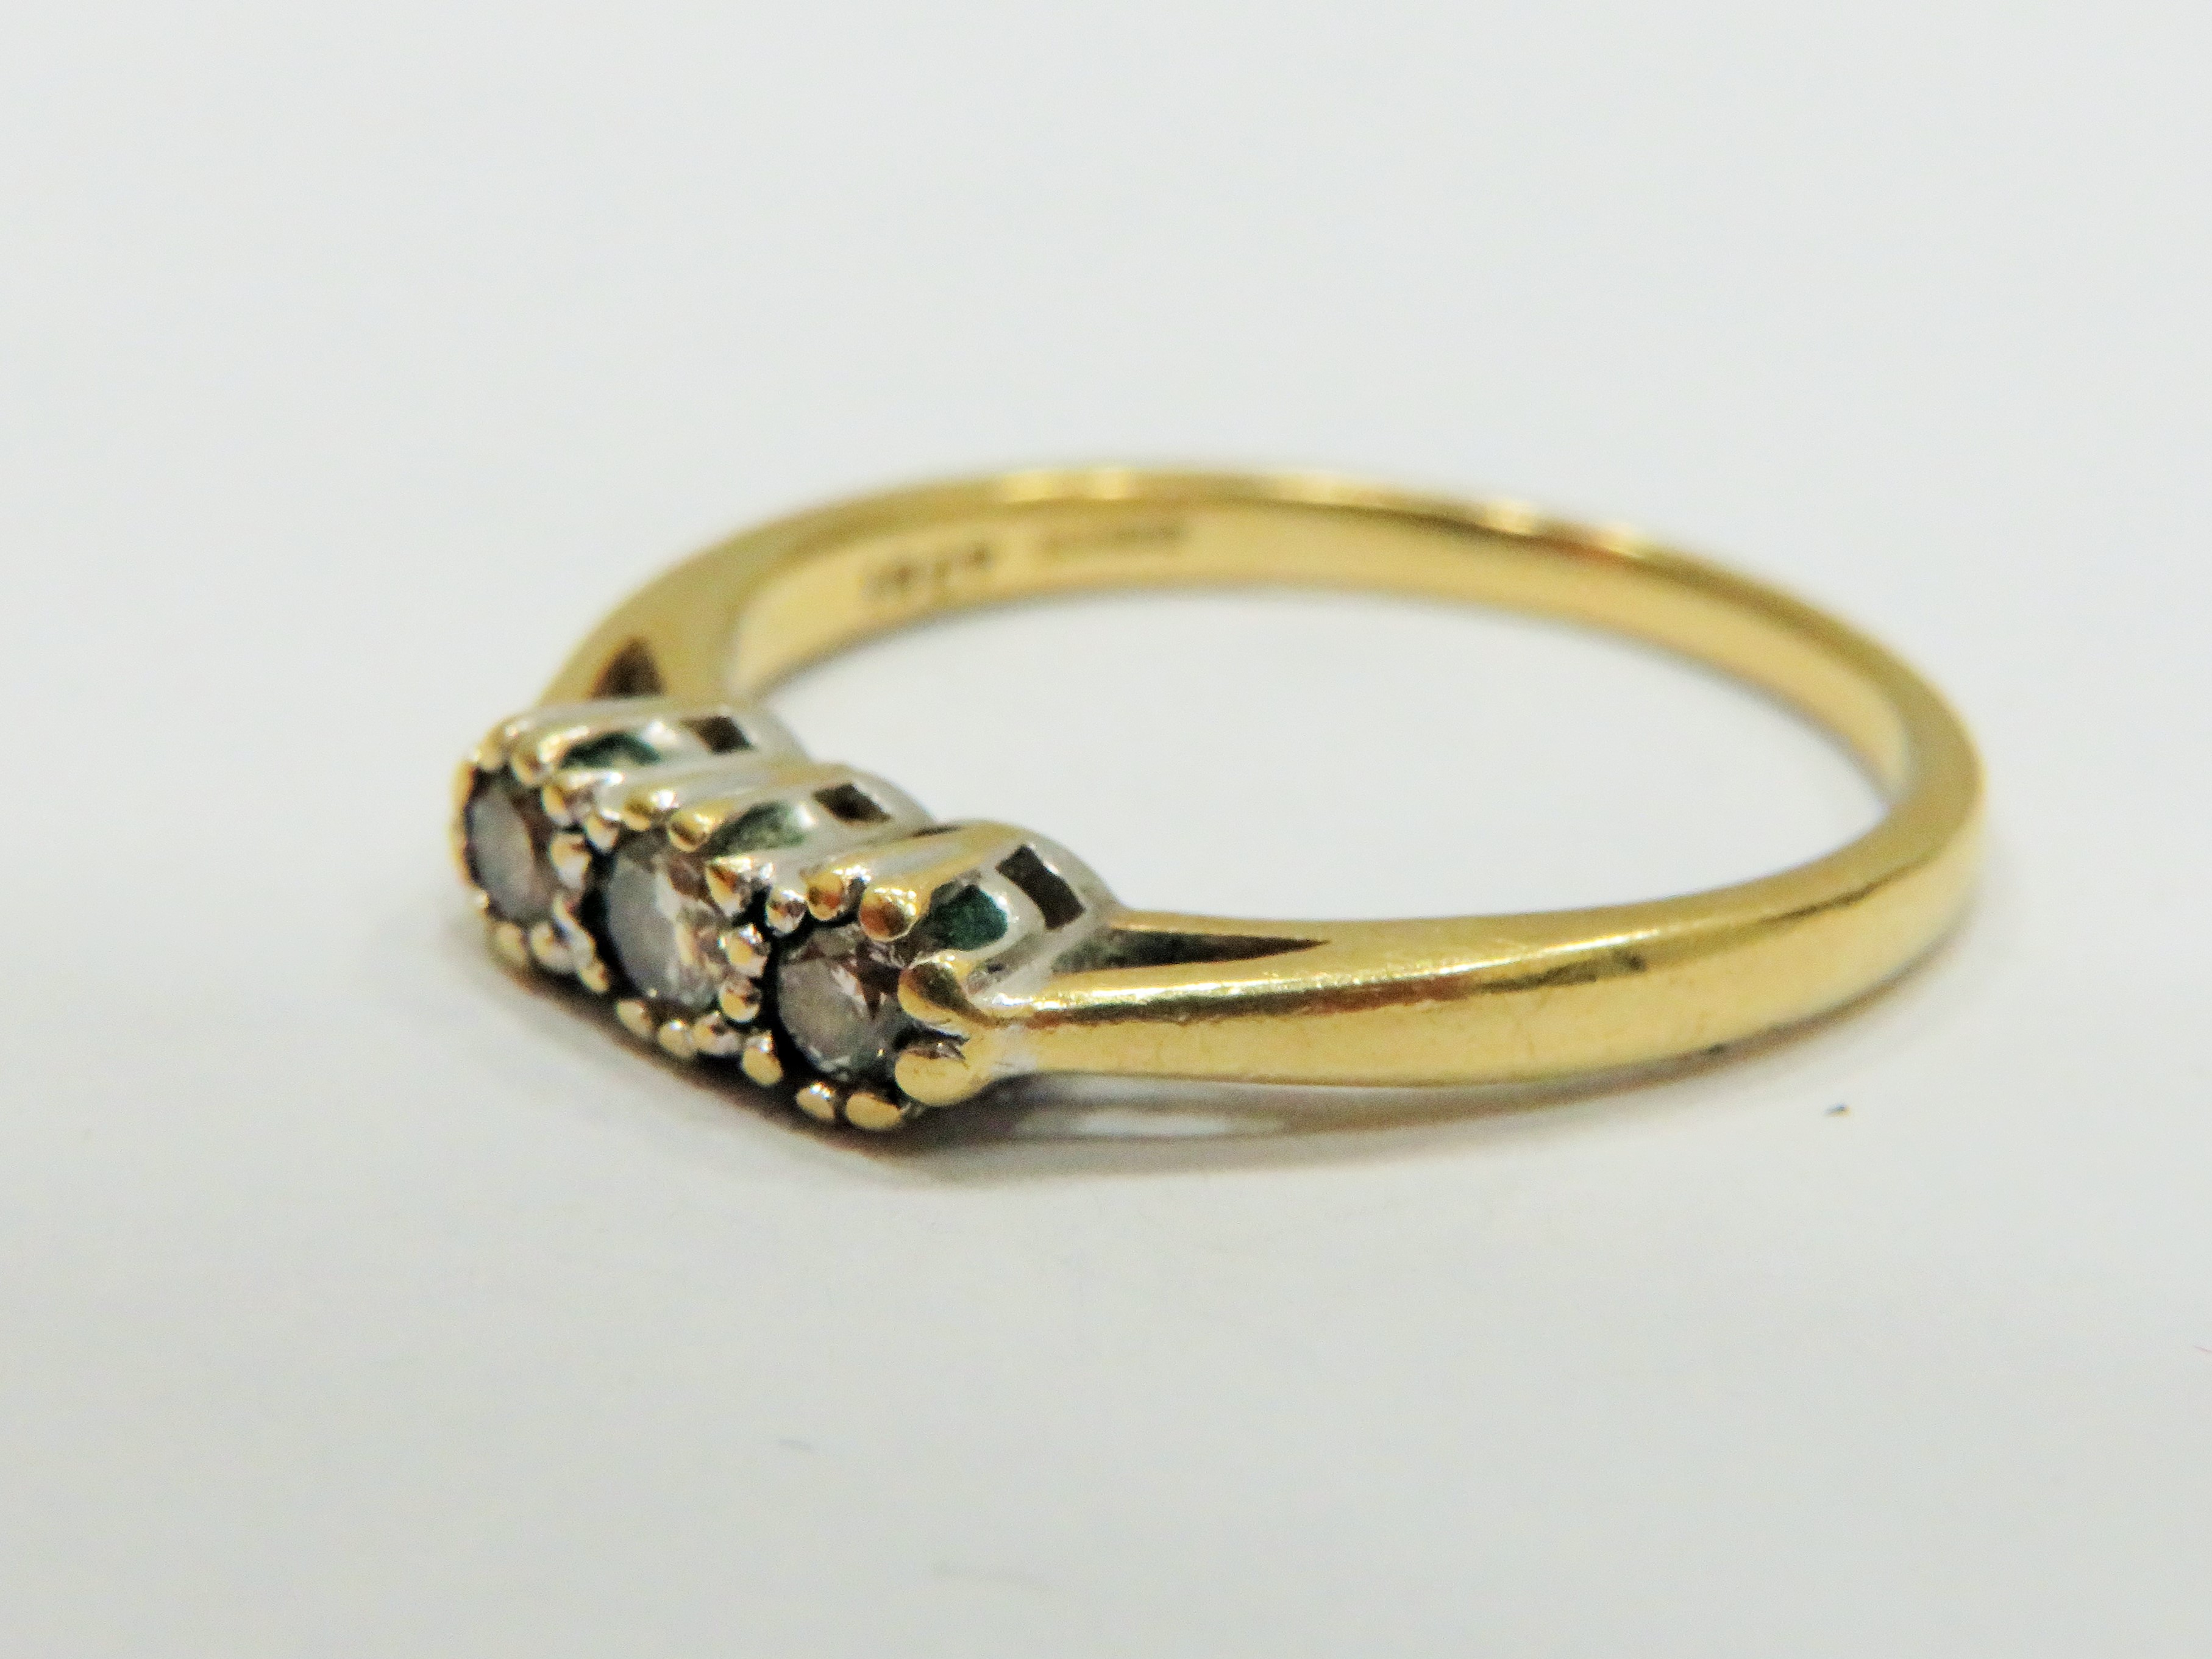 18ct Yellow Gold Diamond Trilogy Ring with White and Yellow Gold setting. Central Diamond 0.10pts, a - Image 2 of 2